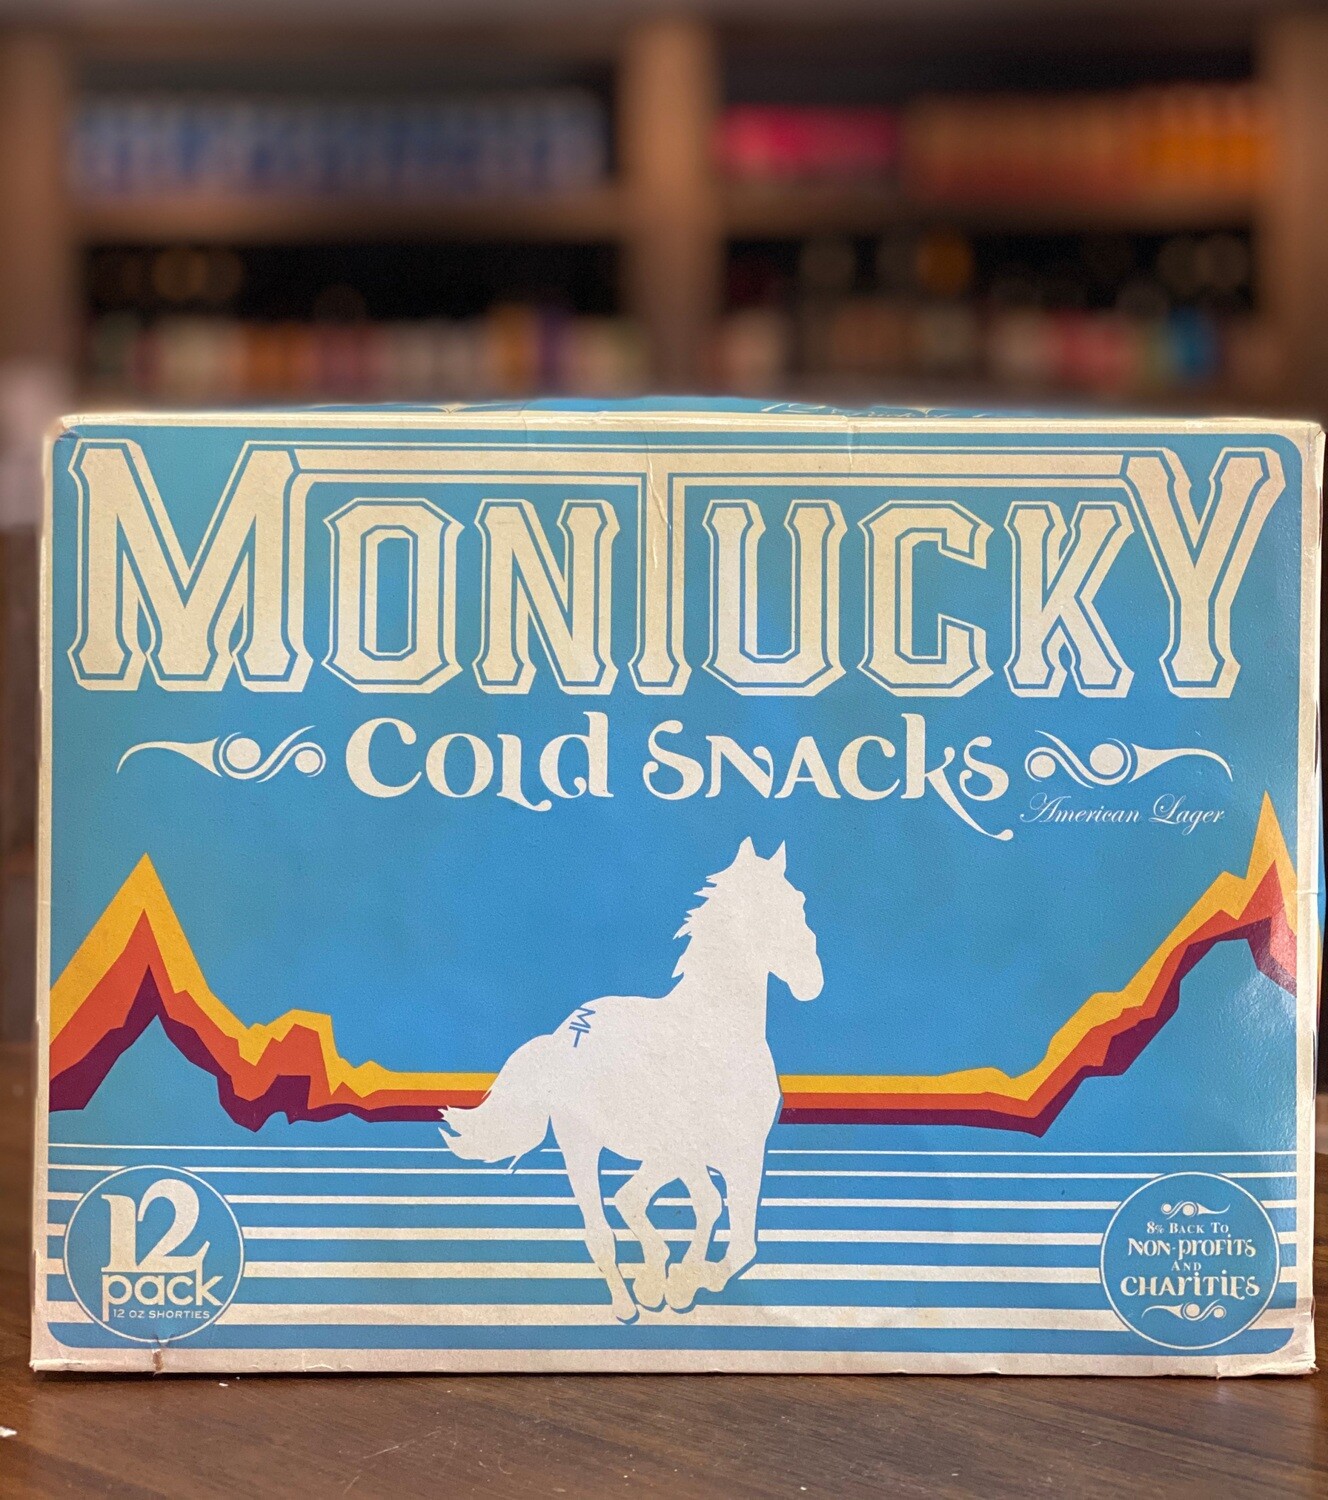 Beer / 12 Pack / Montucky Cold Snacks, 12 pk.